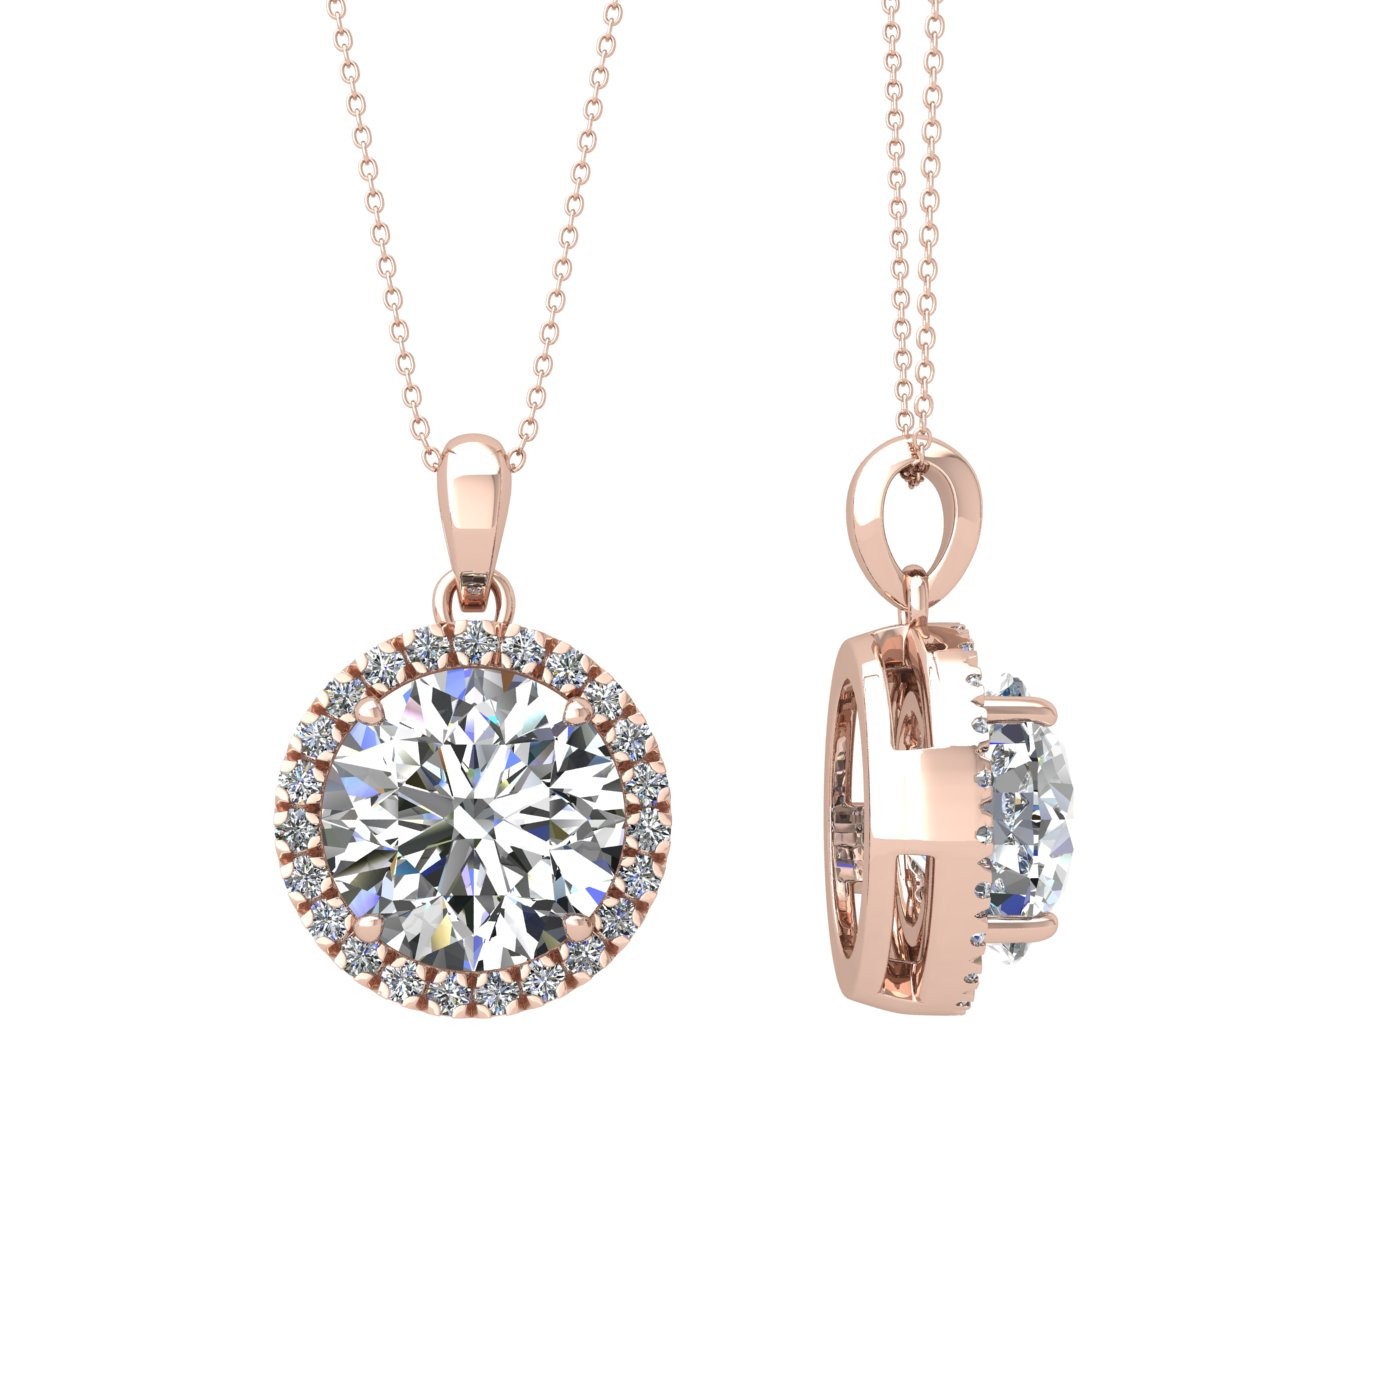 18k rose gold 1,2 ct 4 prong round shape diamond pendant with diamond pavÉ set halo including chain seperate from the pendant